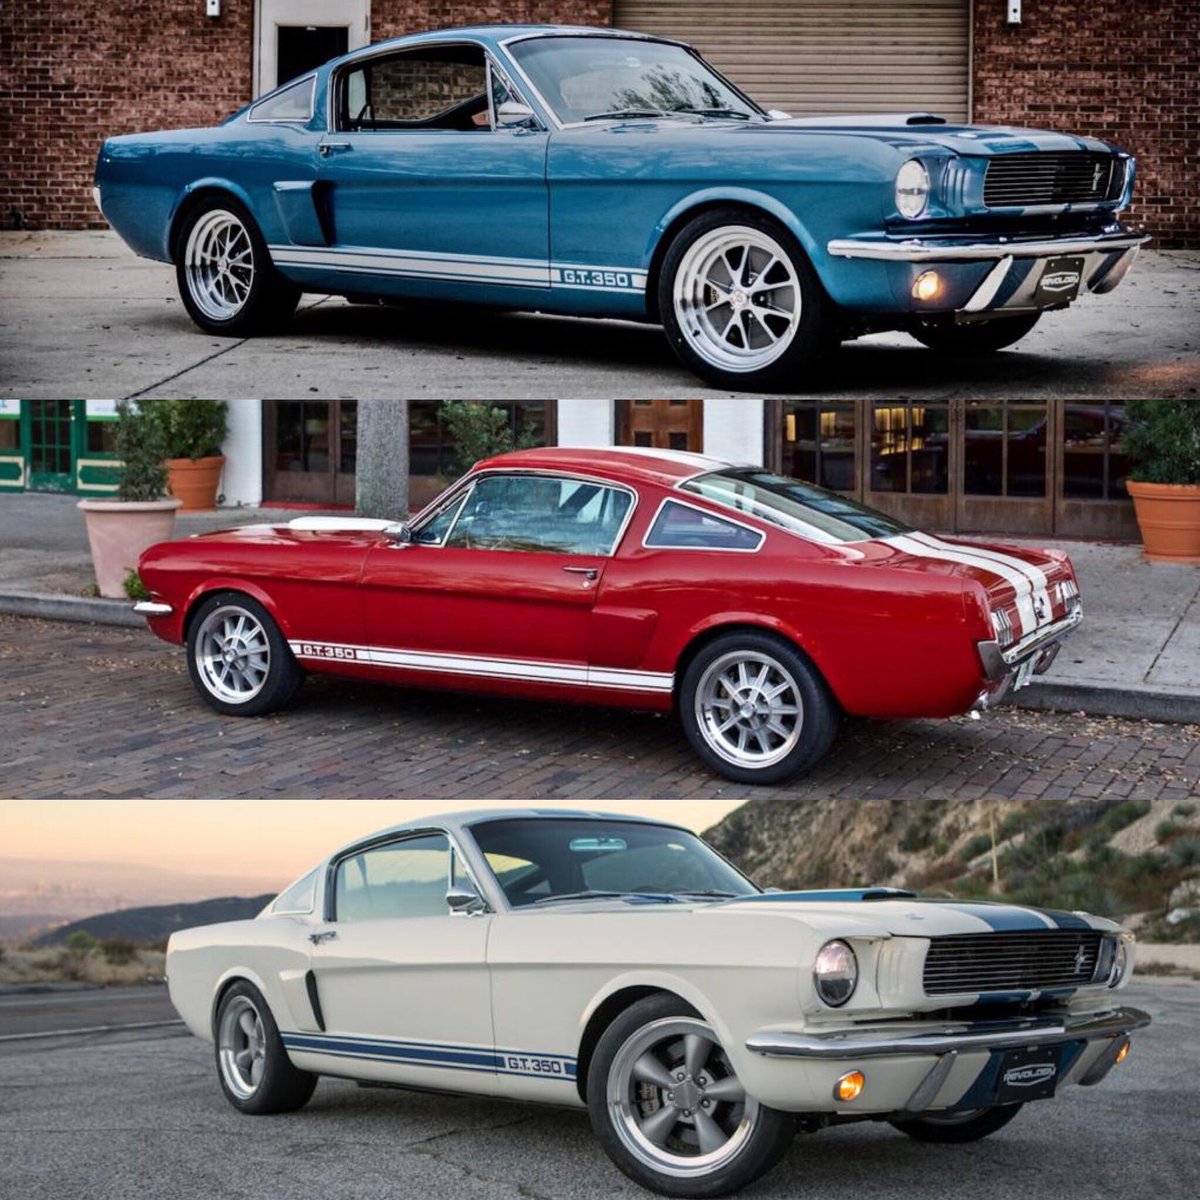 Happy 4th of July!

#revologycars #mustangstory #1966mustangfastback #shelby #bullitt #reproductionmustang #ford #mustang #classicmustang #exoticcars #coyoteengine #gen3 #engineering #mustangconvertible #luxurycars #musclememory #shelbygt350 #roush #builtmustangproud